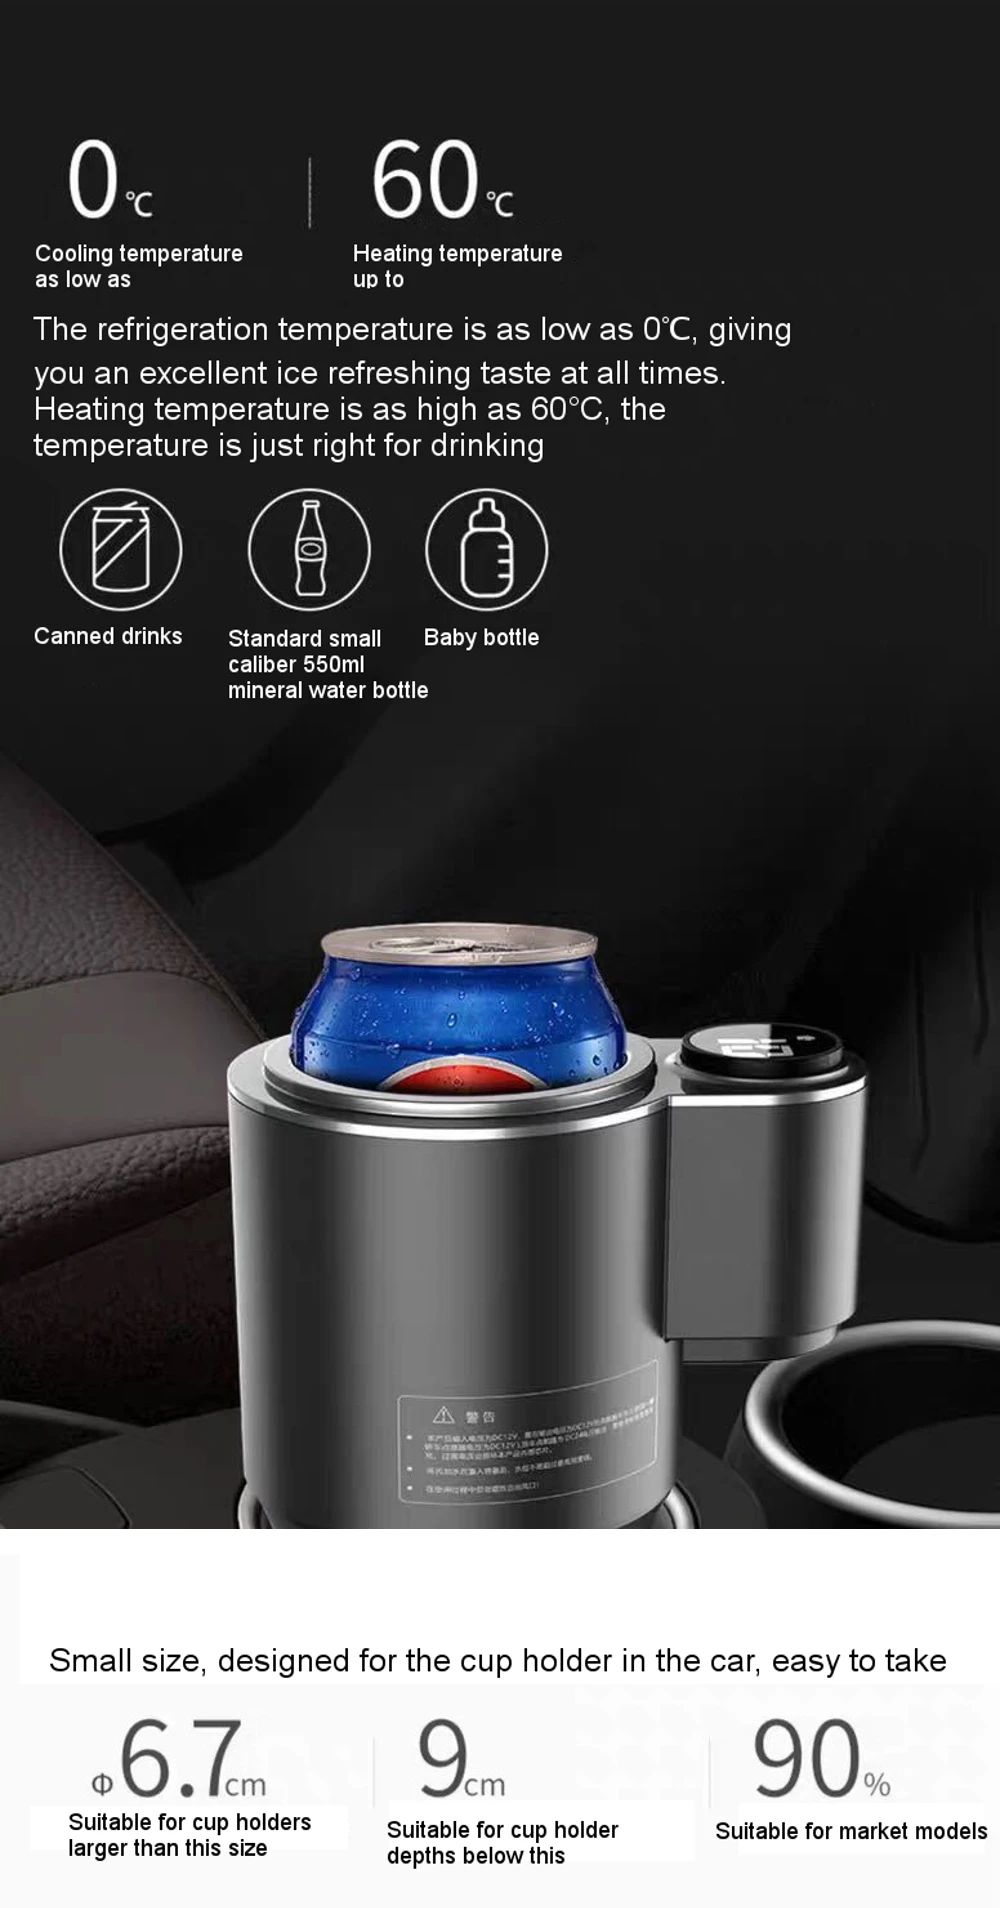 DC 12V Car Heating Cooling Cup 2-in-1 Warmer Cooler Smart Small Refrigerator Beverage Drinks Cans for Office Auto camping fridge freezer